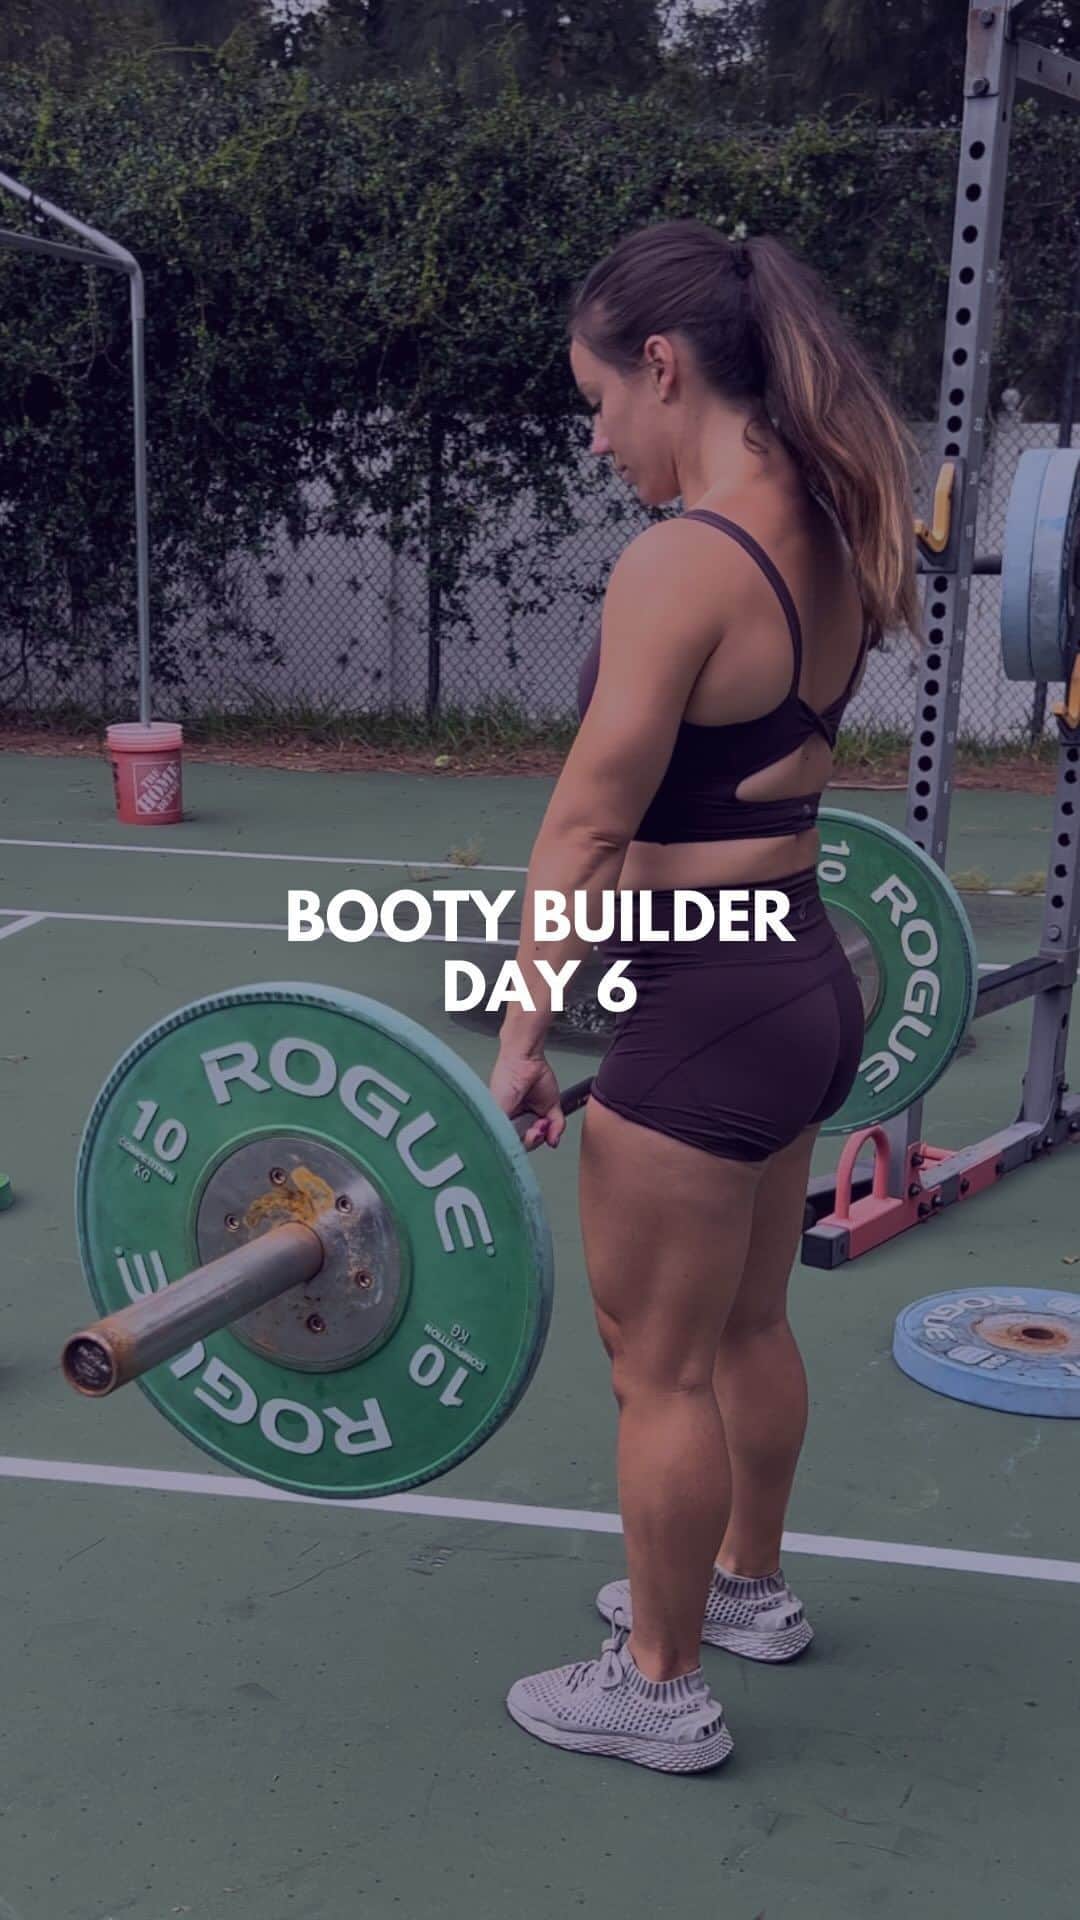 Camille Leblanc-Bazinetのインスタグラム：「Every Monday and Thursday in July is glute day 🍑Full Week 3 Day 2 workout below 👇👇  1️⃣ SINGLE LEG DEADLIFT  3 Sets: 8 Reps (each leg) Single Leg DB Deadlift with a 3 second negative  Rest 1 min between sets   2️⃣ DEADLIFT  Set 1 : 15 reps light Set 2 : 12  reps Set 3 : 10 reps Set 4 : 8 Reps Set 5 : 8 Reps  Rest 2 minutes between sets   3️⃣STEP UP SUPERSET  3 sets: 💜10 high step-ups (each side) with a 5 sec negative Directly into 💜30 banded hamstring curls  Rest 1 min or less between sets. Build up in weight for the step-up, and respect the tempo 👏  🔥🔥🔥 Log your results for free this month with code “TRAINING” at the Booty Builder link in bio.  #glutes #hamstrings #legday」